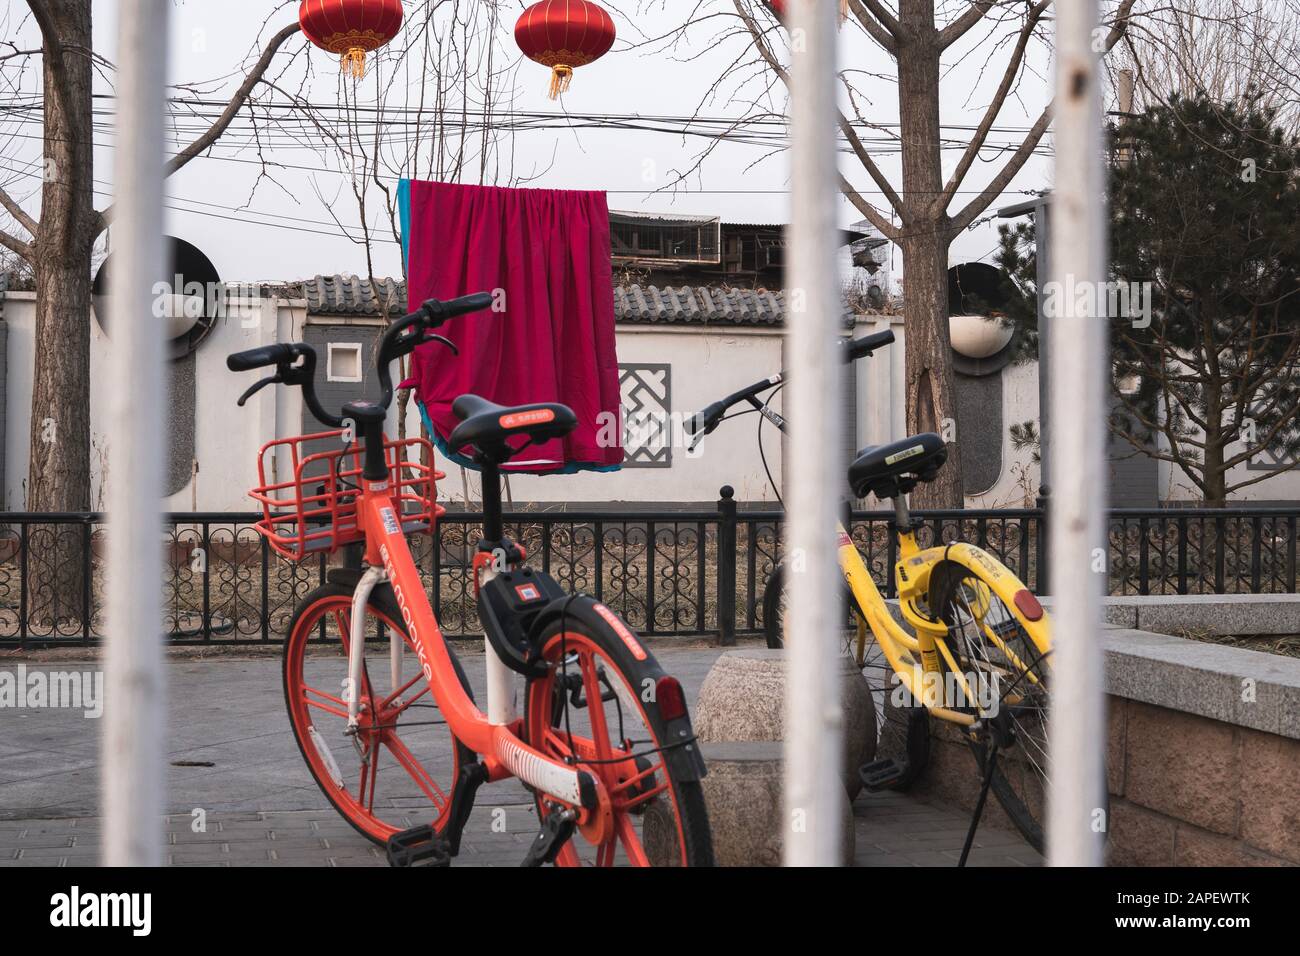 Bicycle sharing in Beijing. Two bicycles on the street in Beijing, China behind a railing. Red lanterns in background, during Chinese New Year. Stock Photo